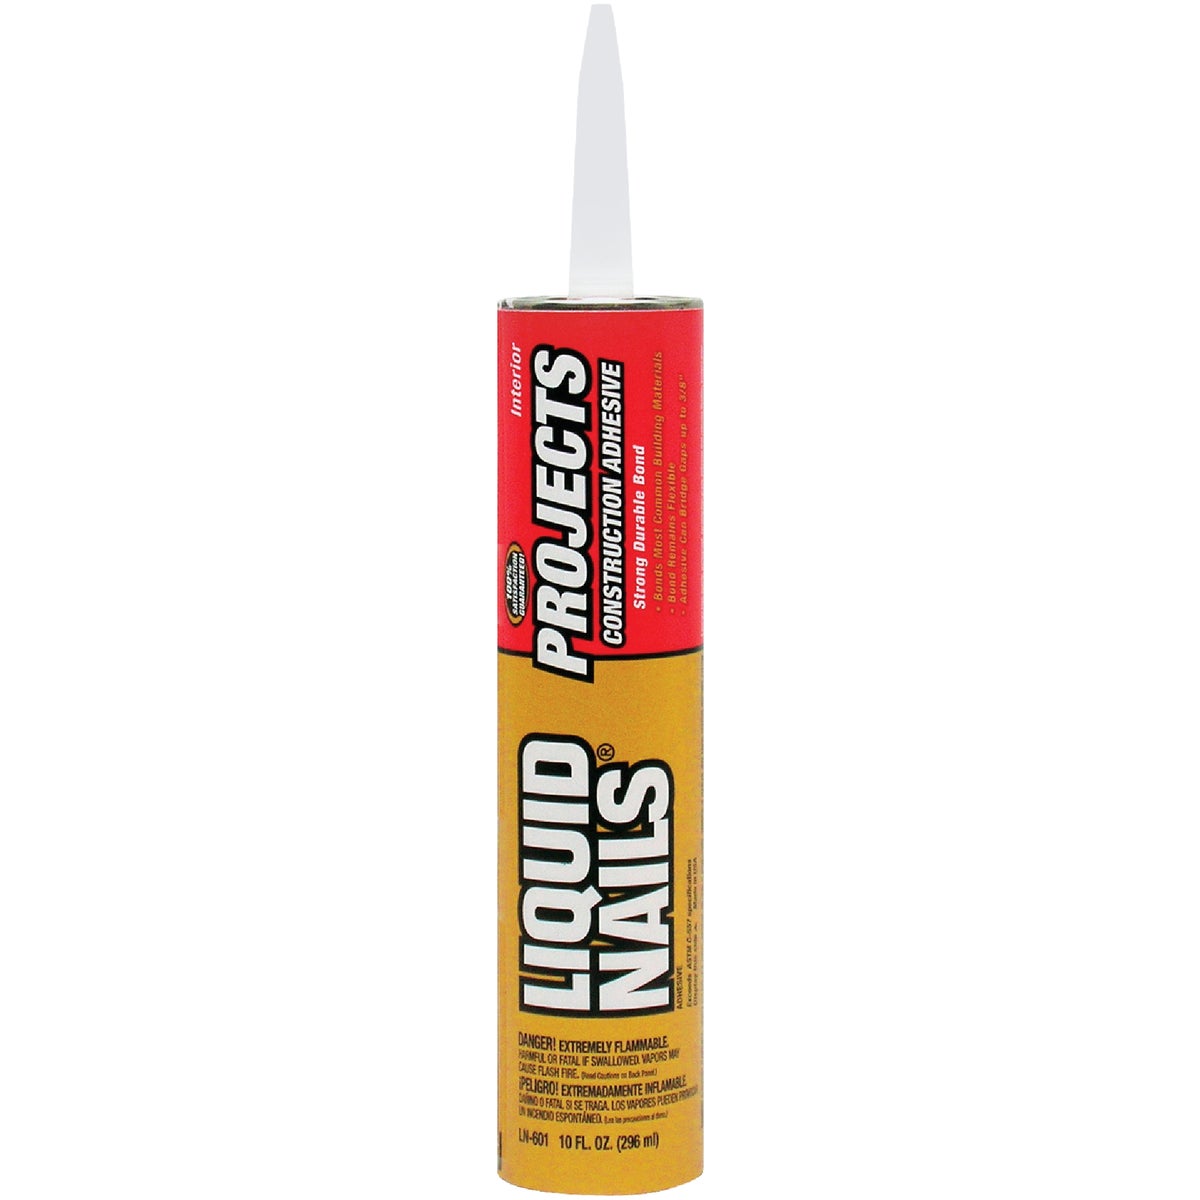 Item 266159, High-quality, solvent-based, waterproof adhesive that creates a strong 